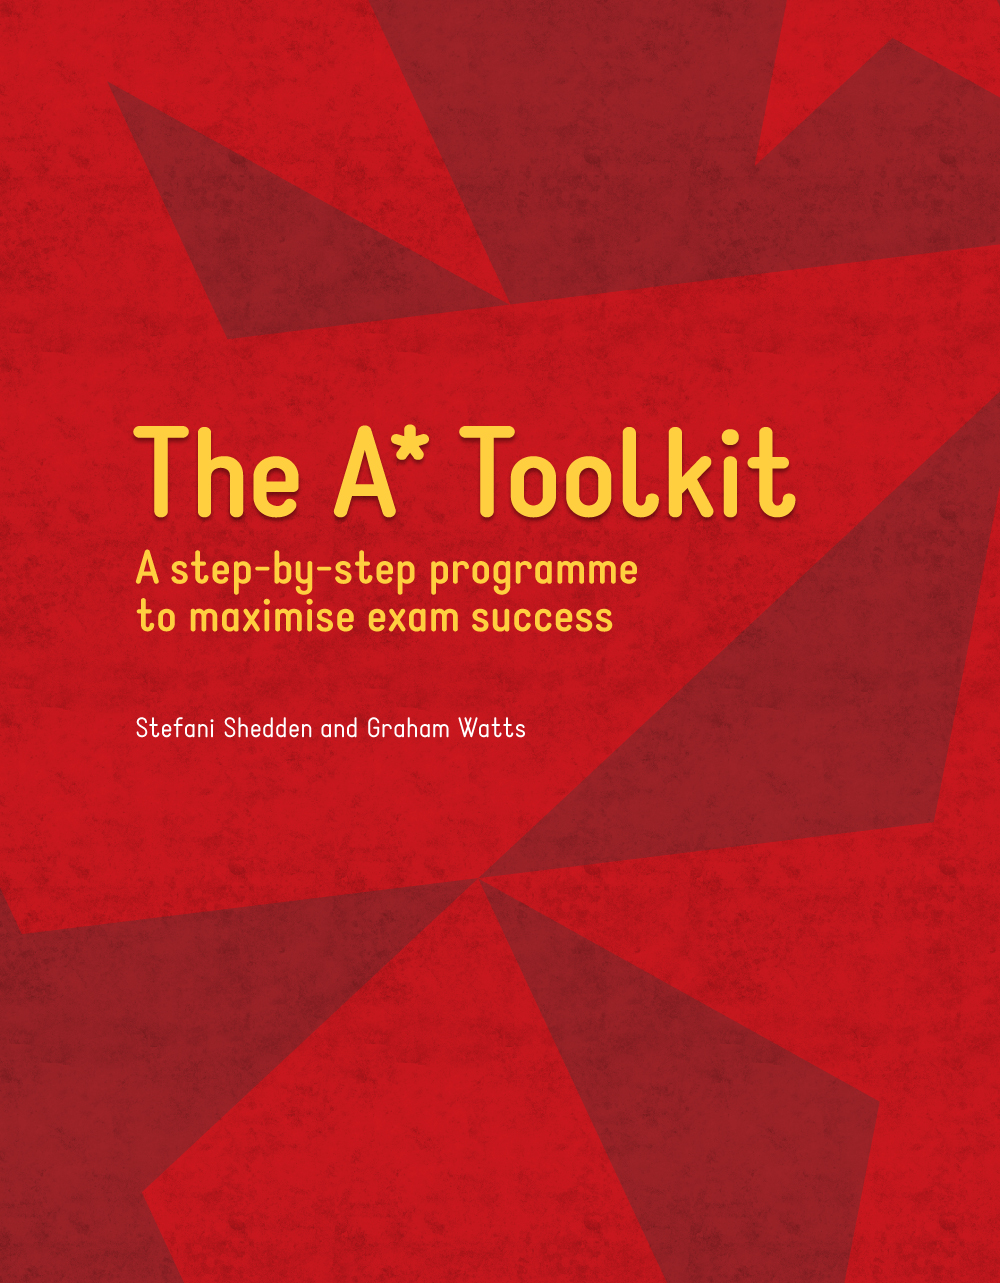 The A* Toolkit: A step-by-step programme to maximise exam success